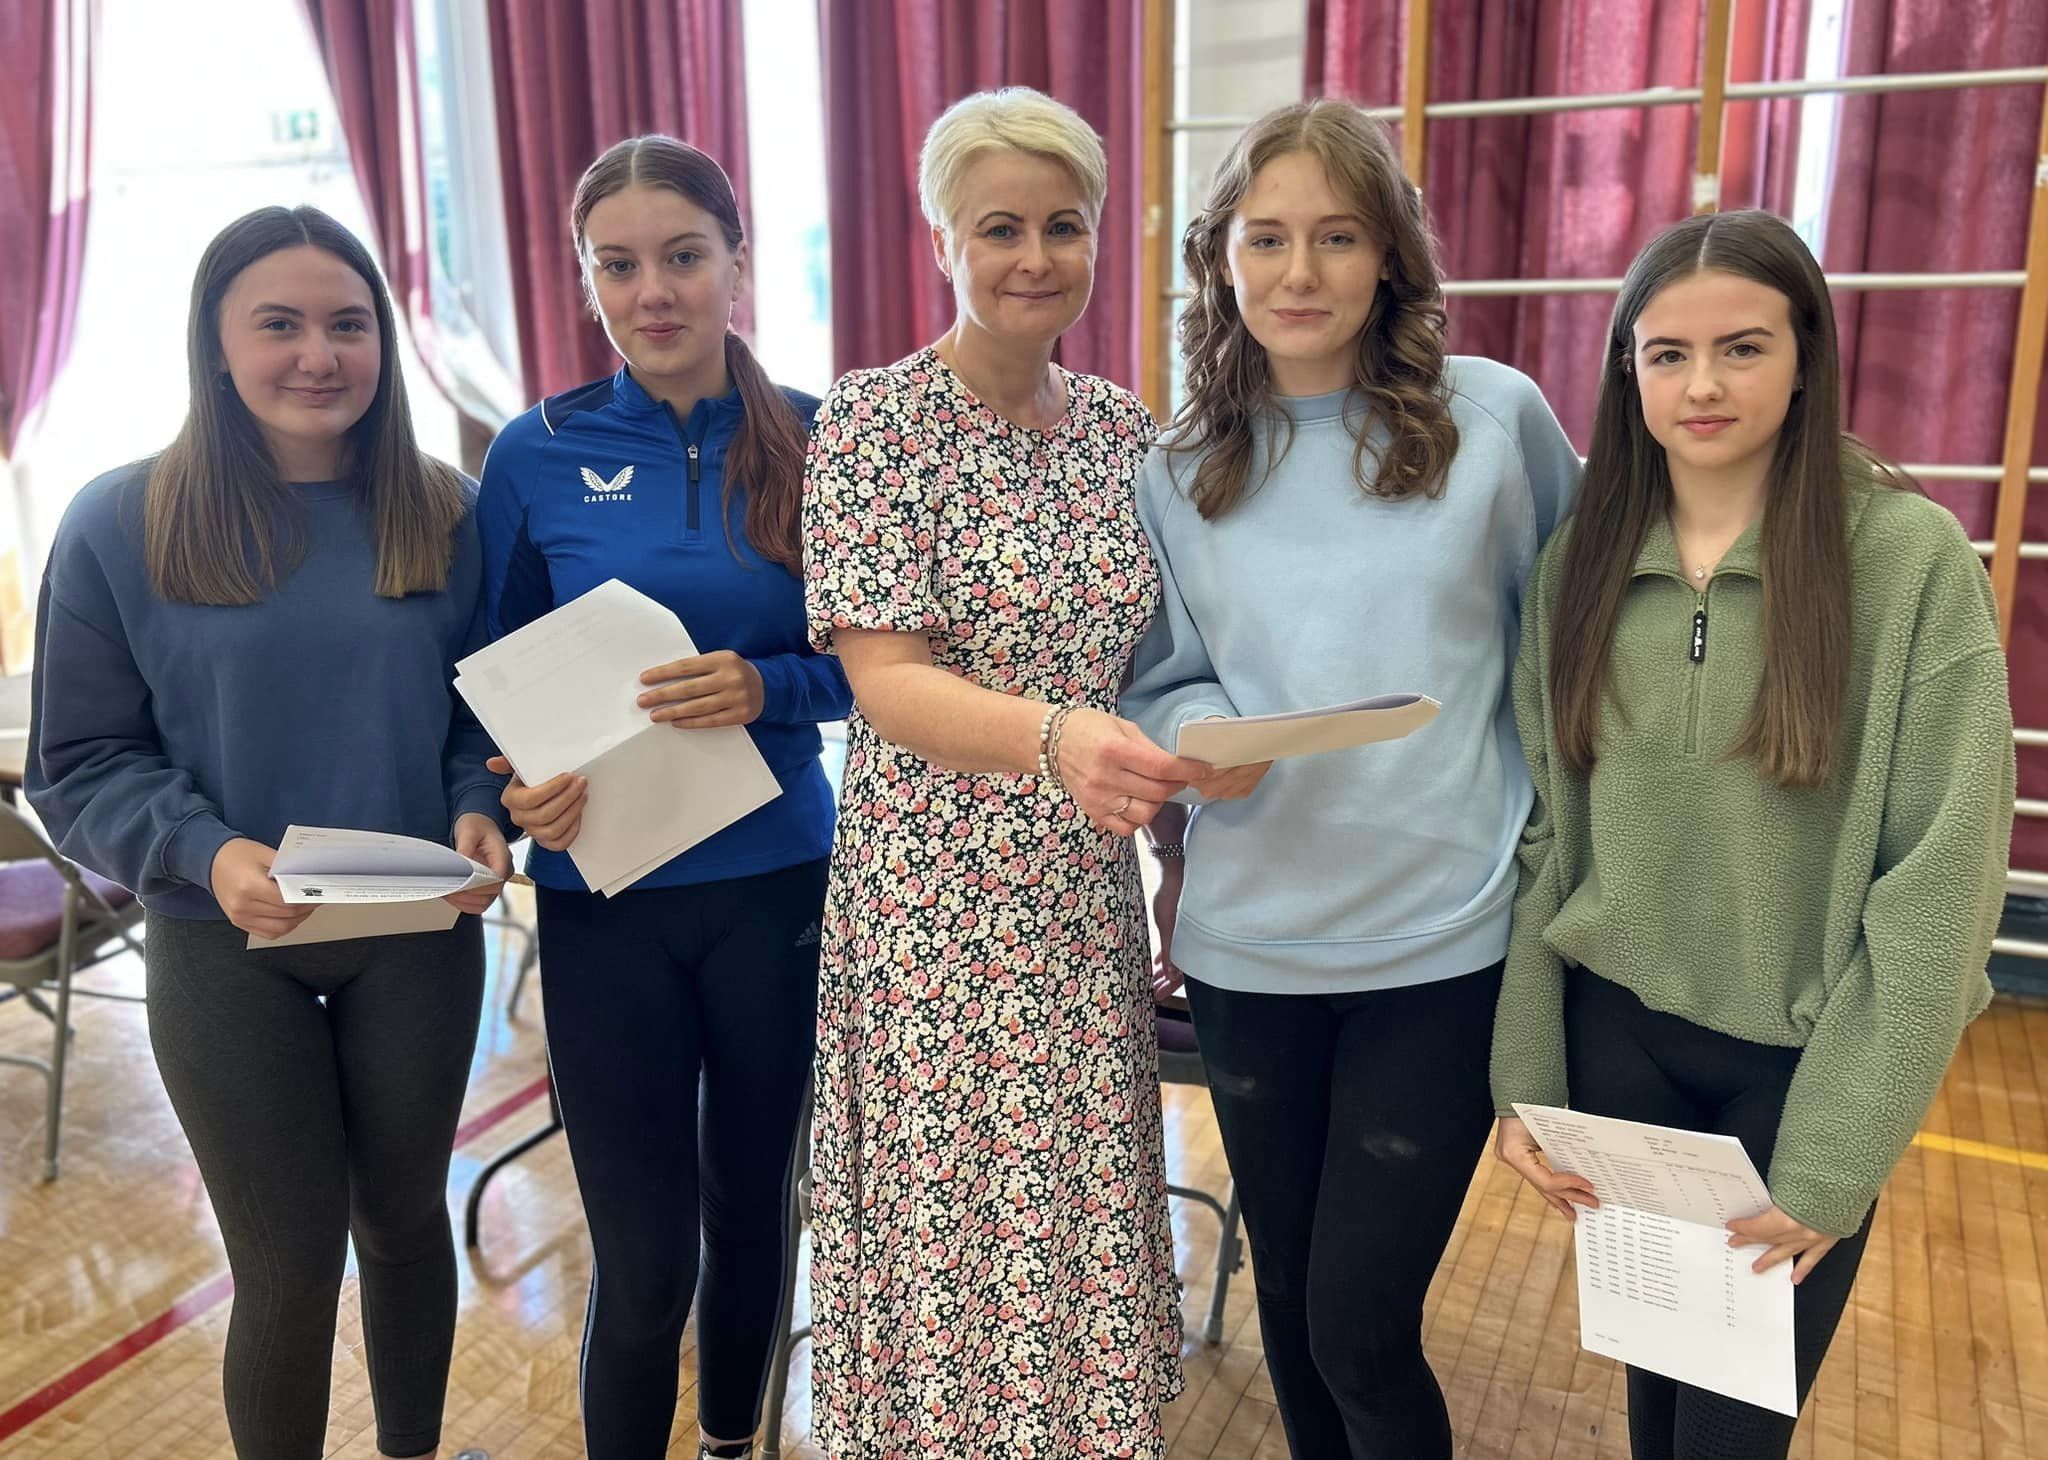 Castlederg High School students Molly Monteith, Amy Donnell, Rebecca Ellis and Abby Sherlock share their results with Mrs. Sandra Cashel, incoming Principal.